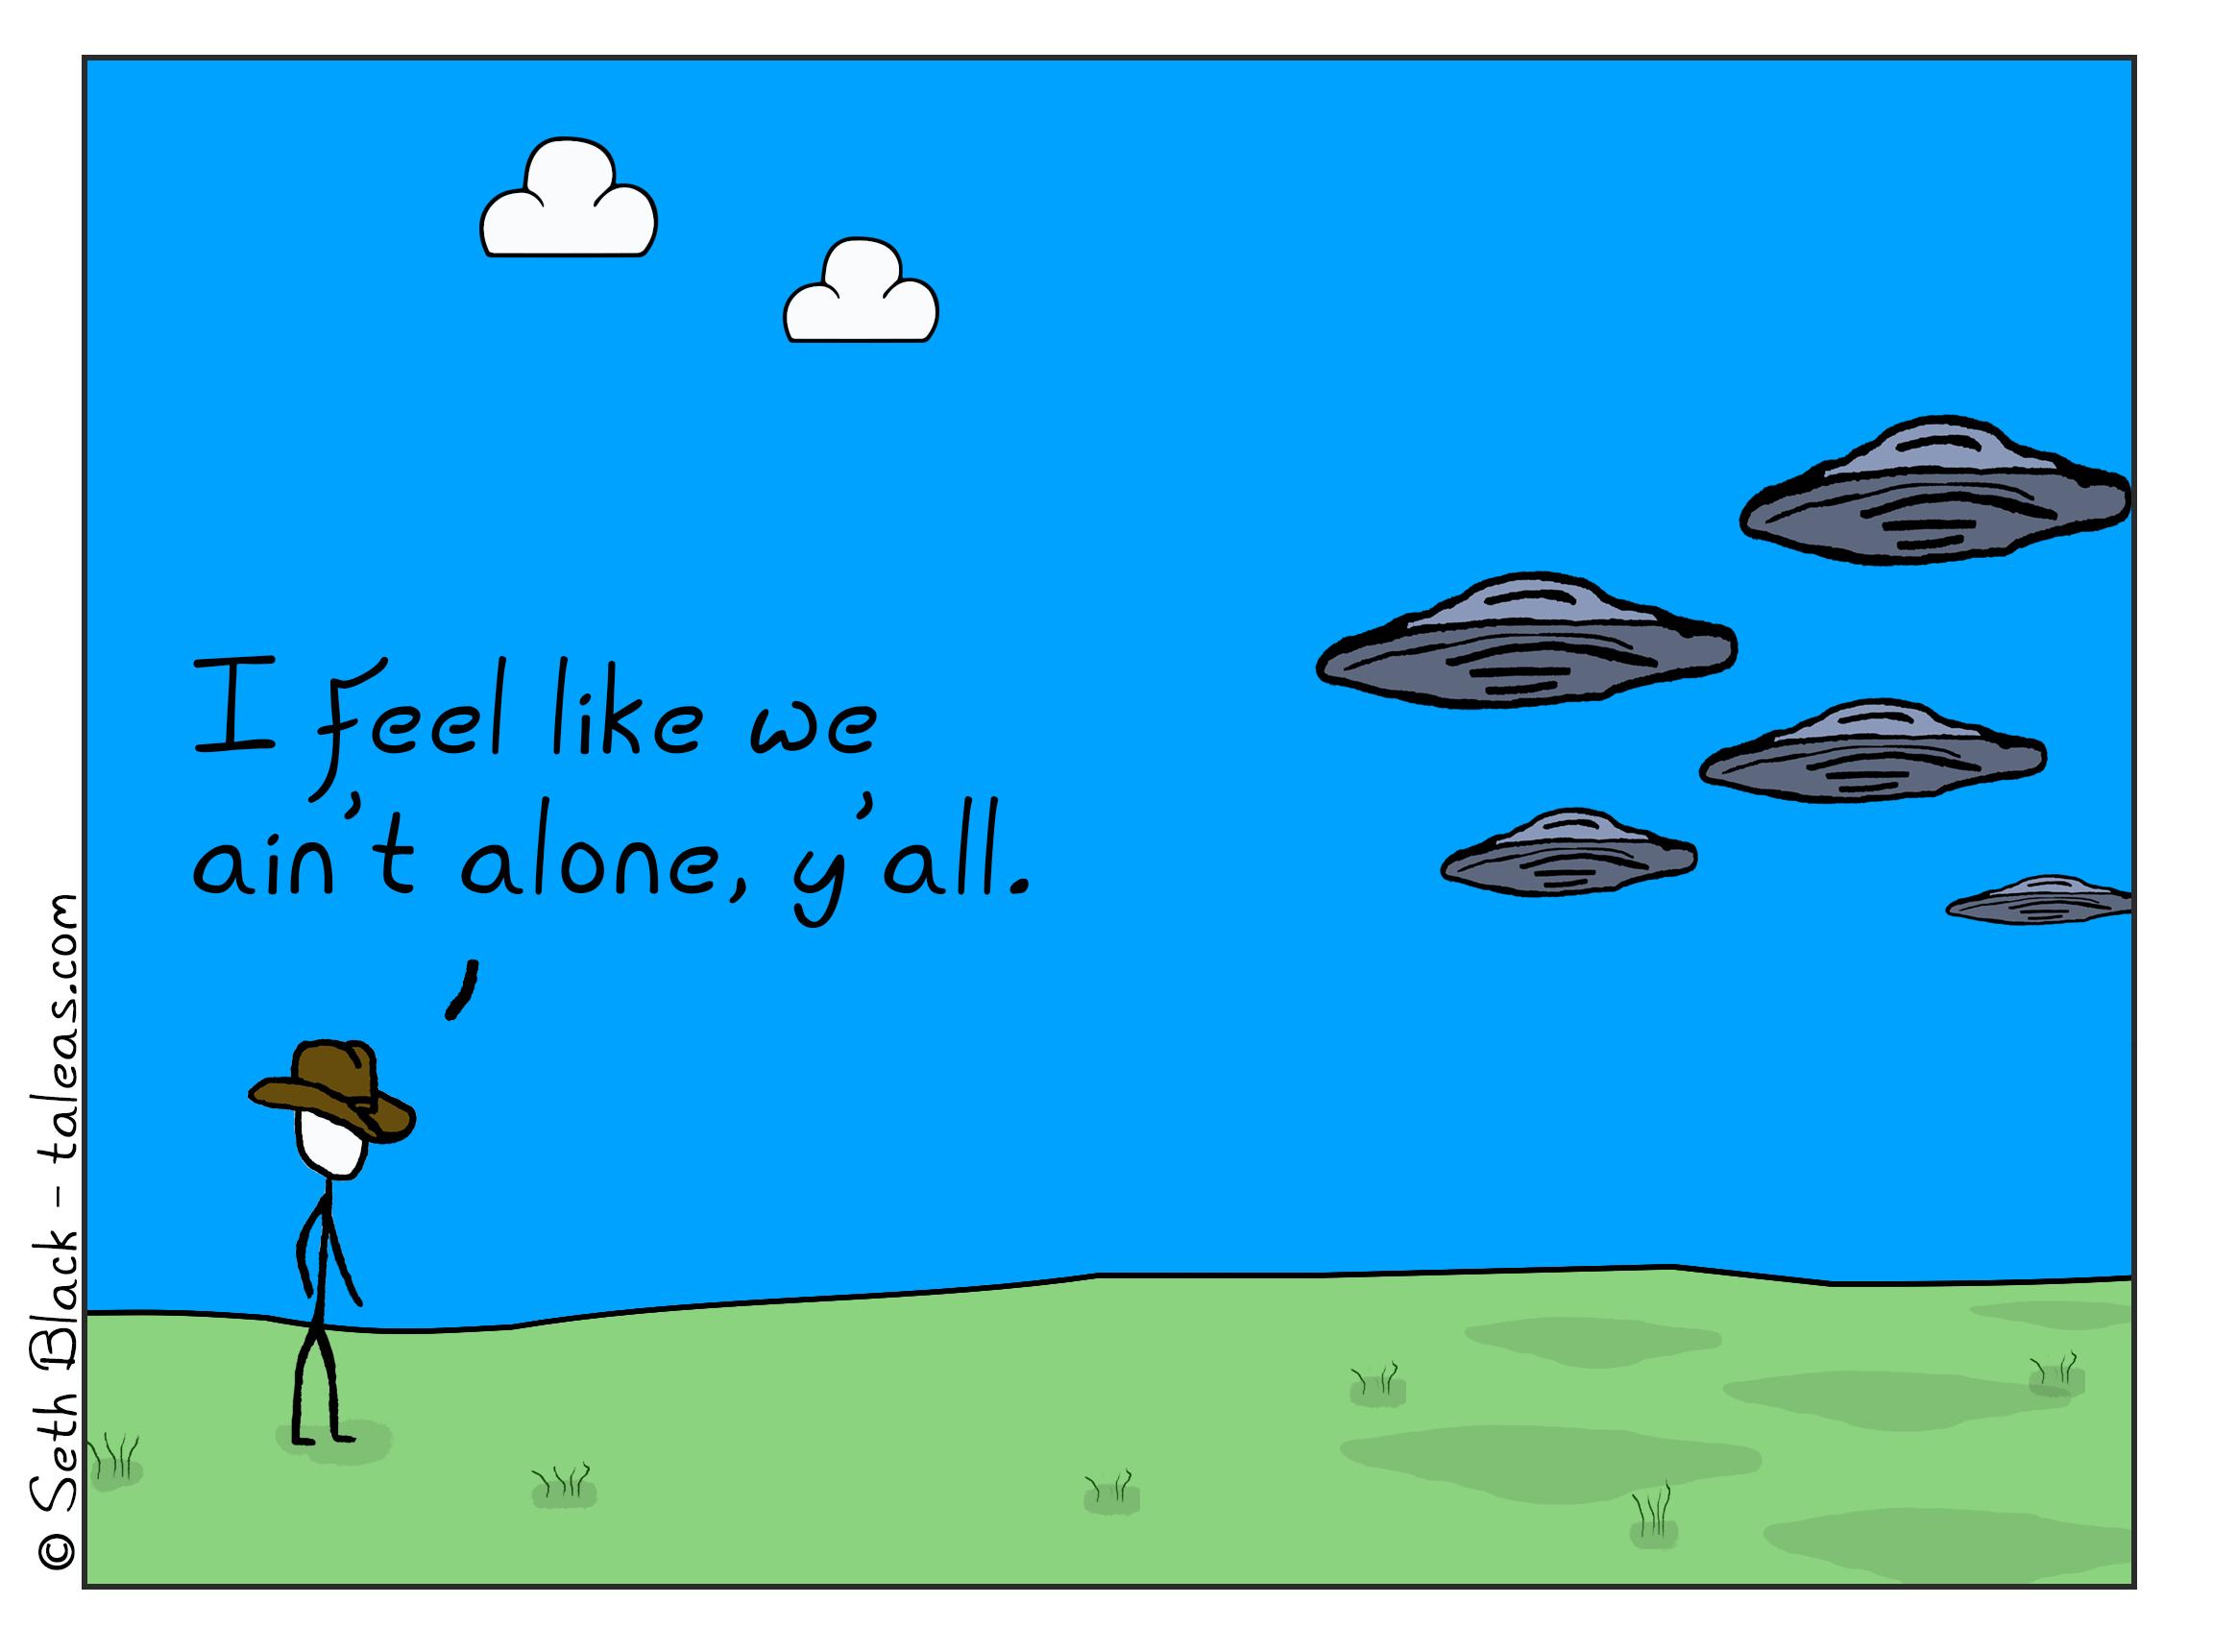 A cowboy wearing a cowboy hat stands in a pasture while 5 UFOs enter the frame. The cowboy calmly states, "I feel like we ain't alone, y'all."